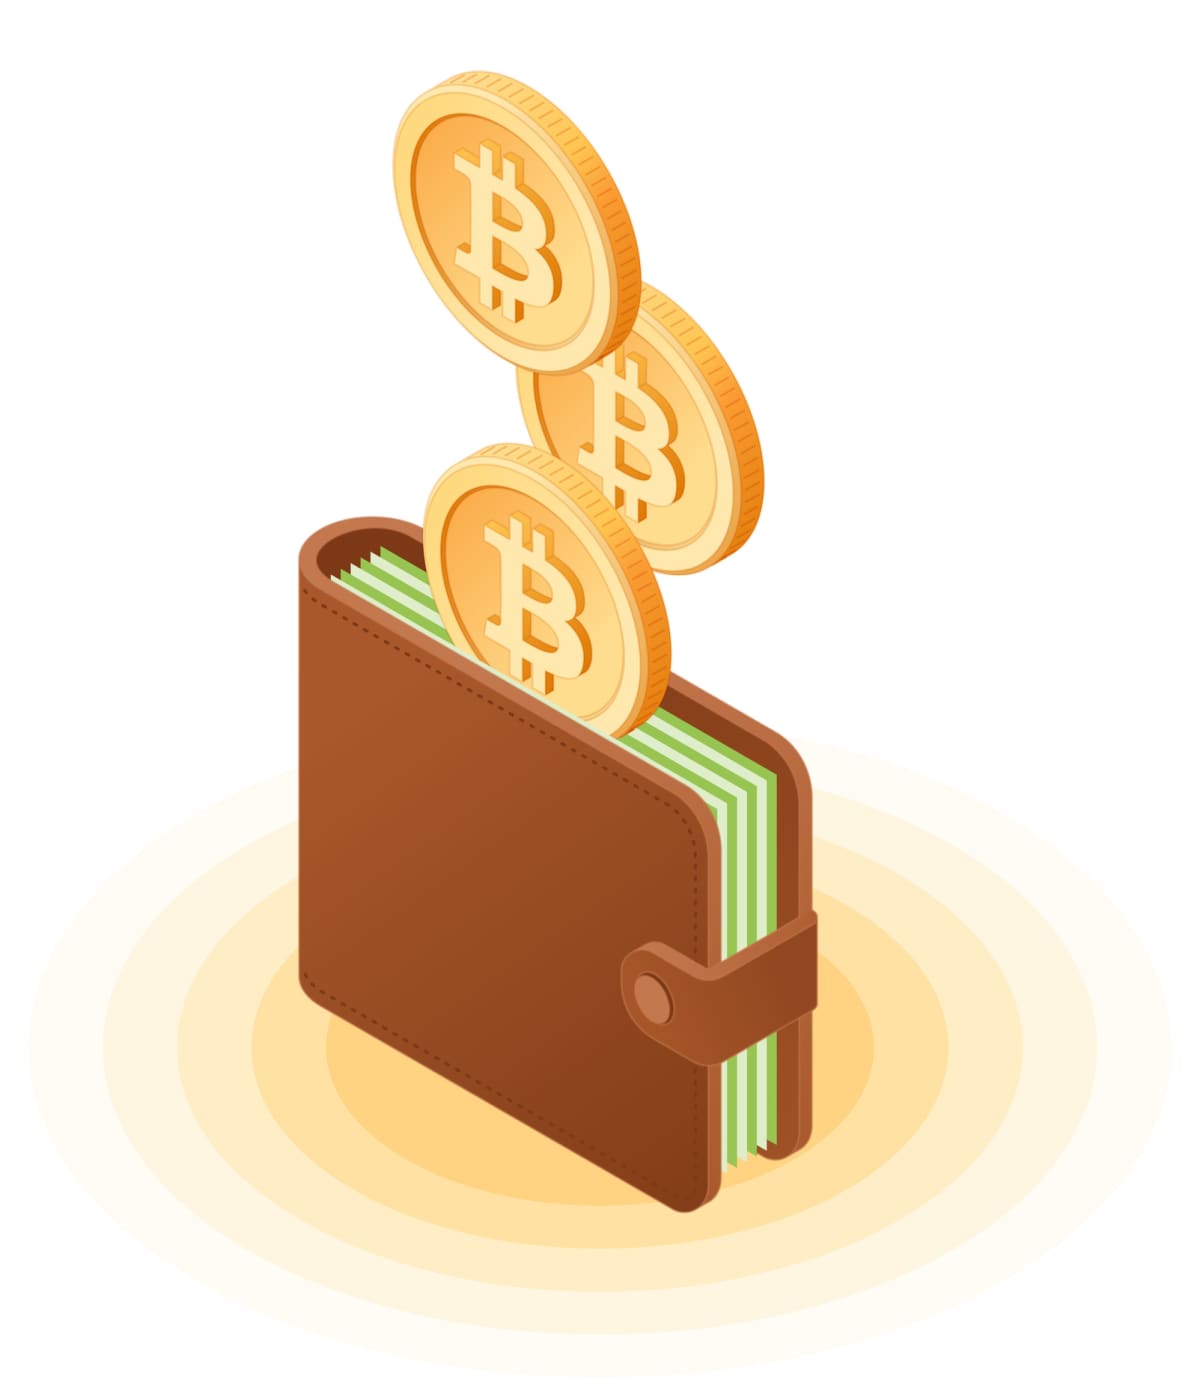 Flat isometric illustration of bitcoins droping into wallet with banknotes. The business growth, money, earnings, profit, success, blockchain, cryptocurrency, vector concept isolated on white.